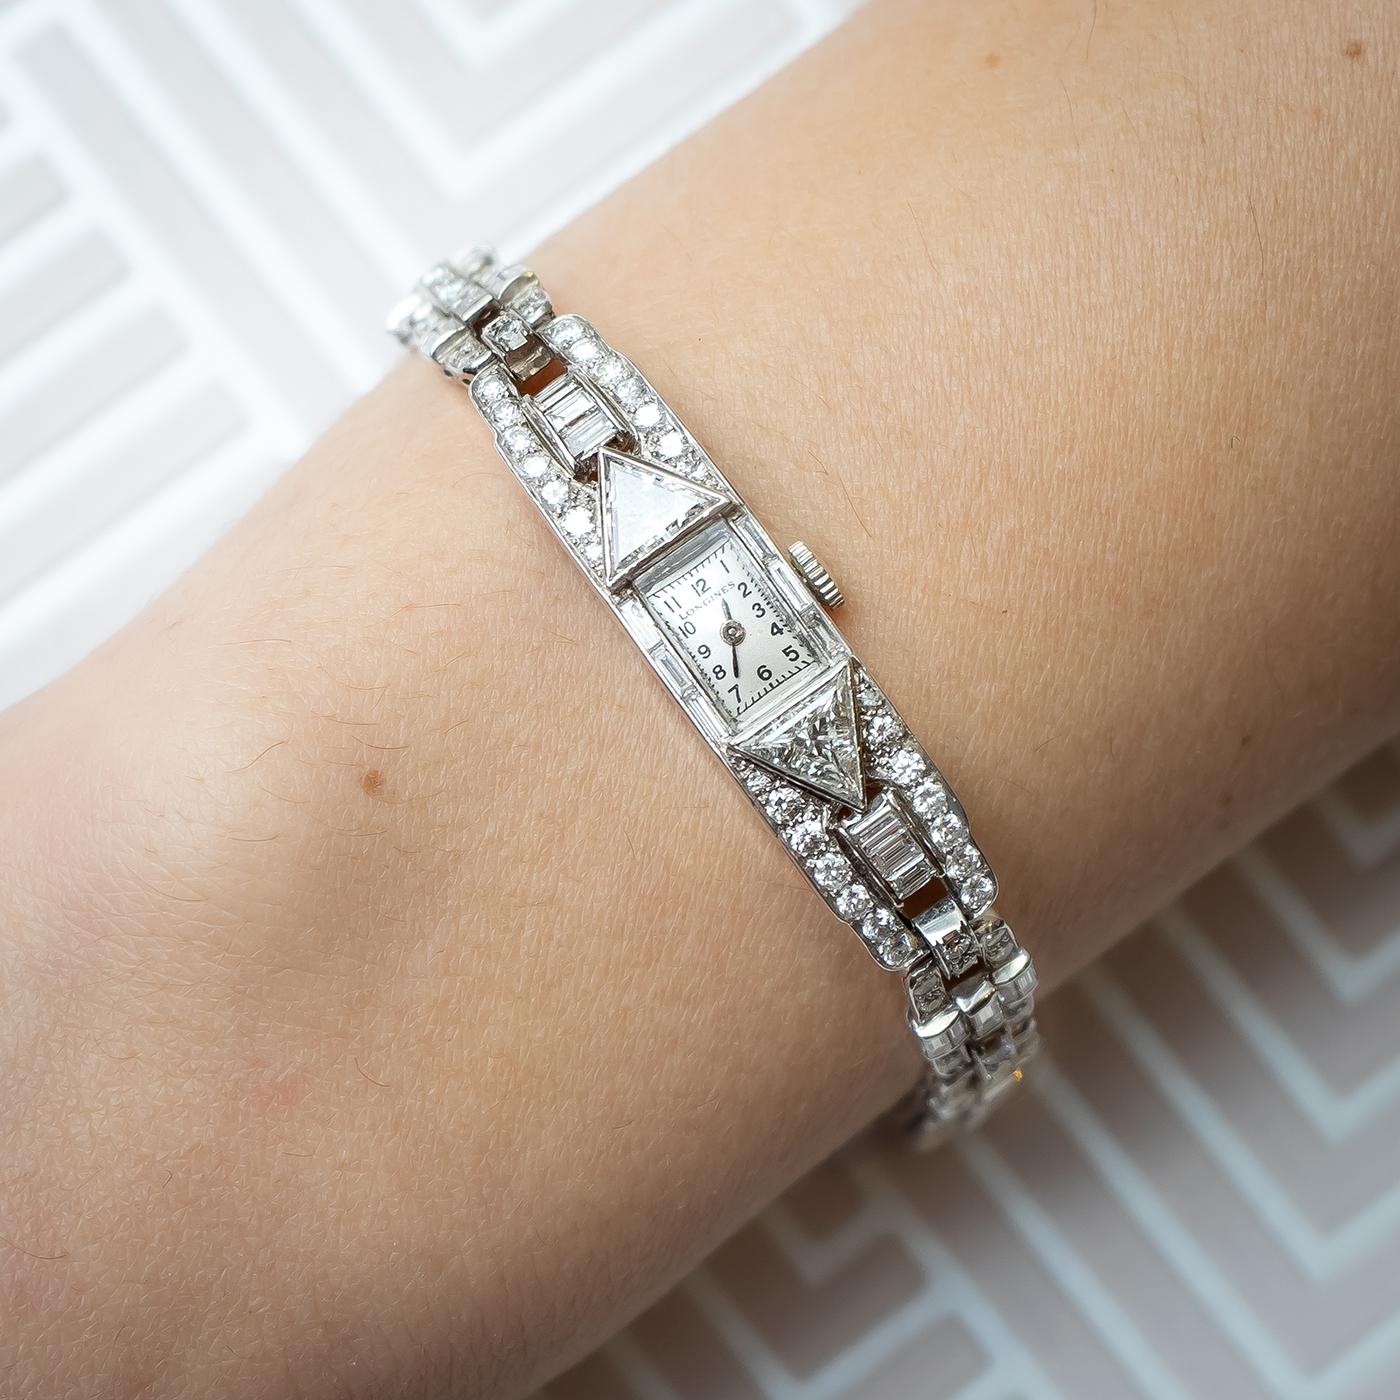 An Art Deco Tishman & Lipp Longines diamond cocktail watch, mounted in platinum, with a diamond set bracelet, with a rectangular, two piece hinged platinum case. It is attached to an open frame geometric link platinum bracelet, which measures